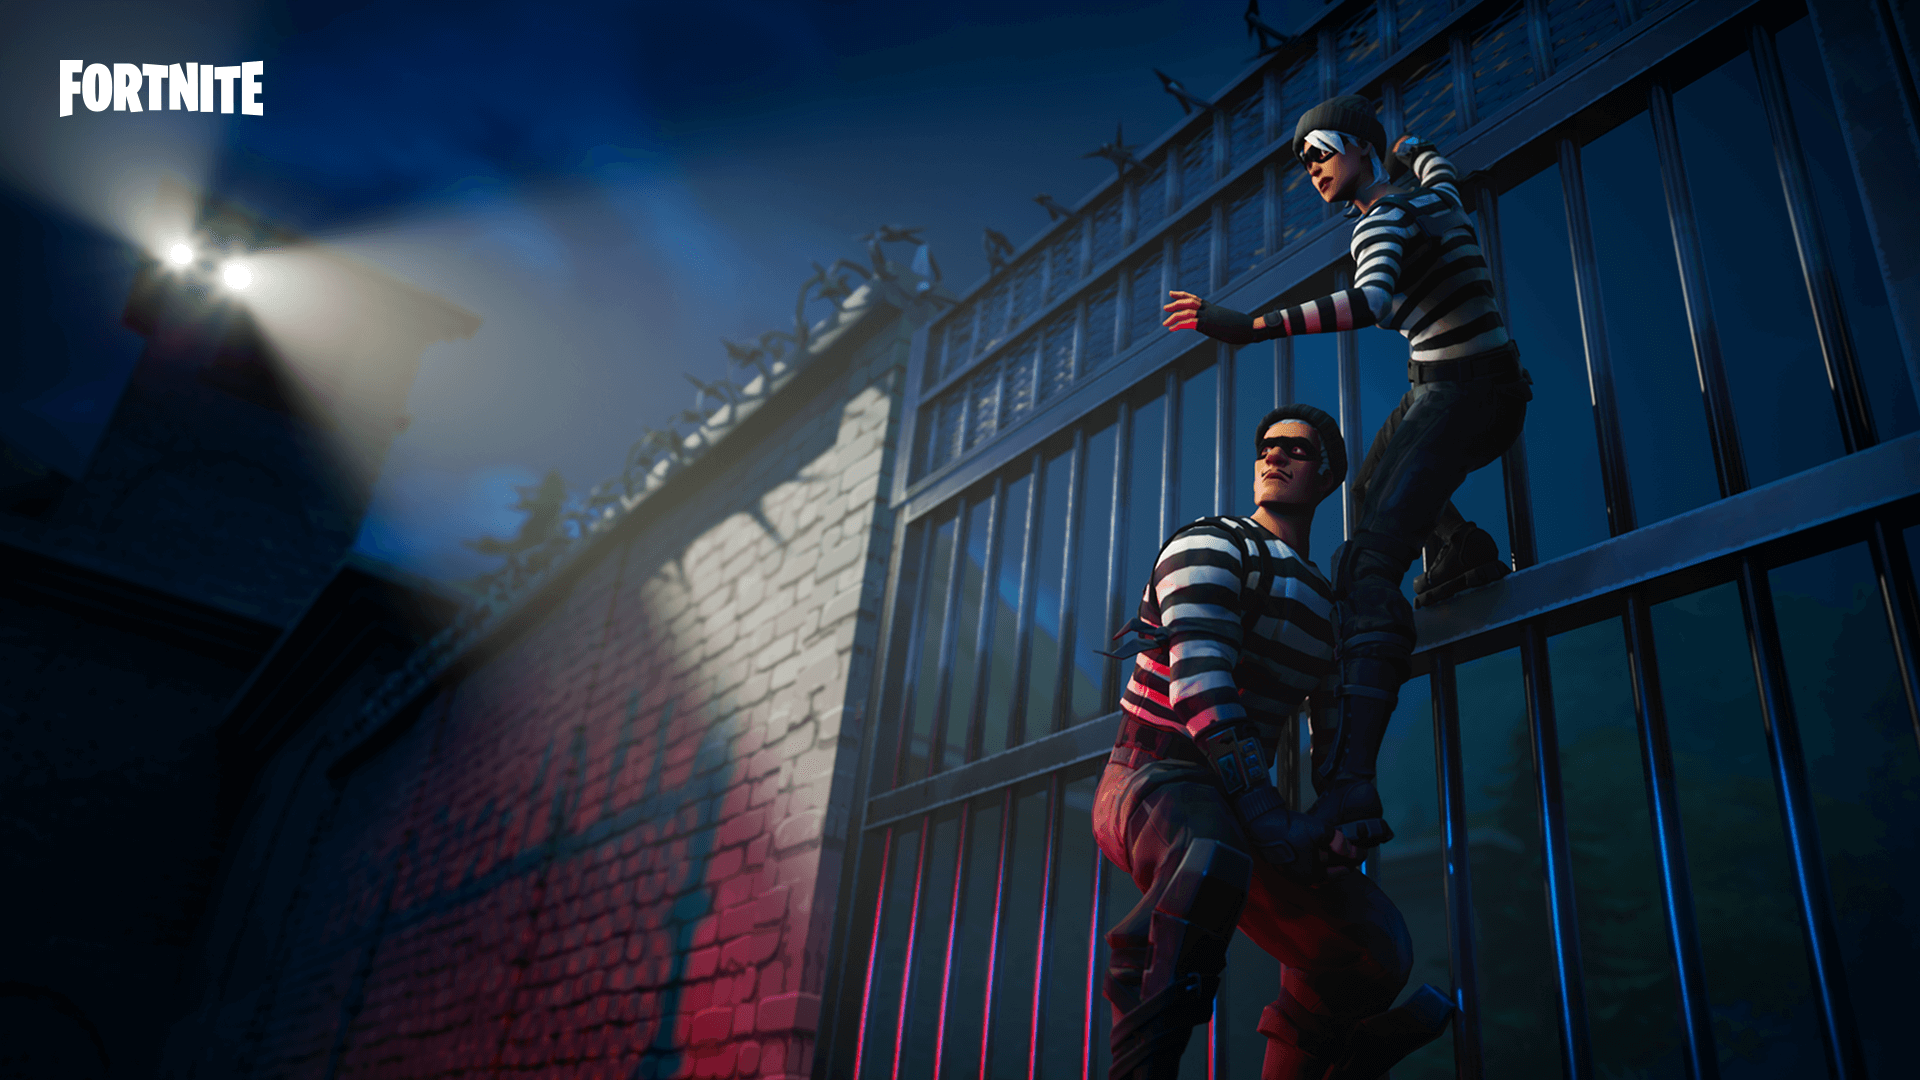 Two Fortnite characters dressed as robbers climbing over a prison wall.